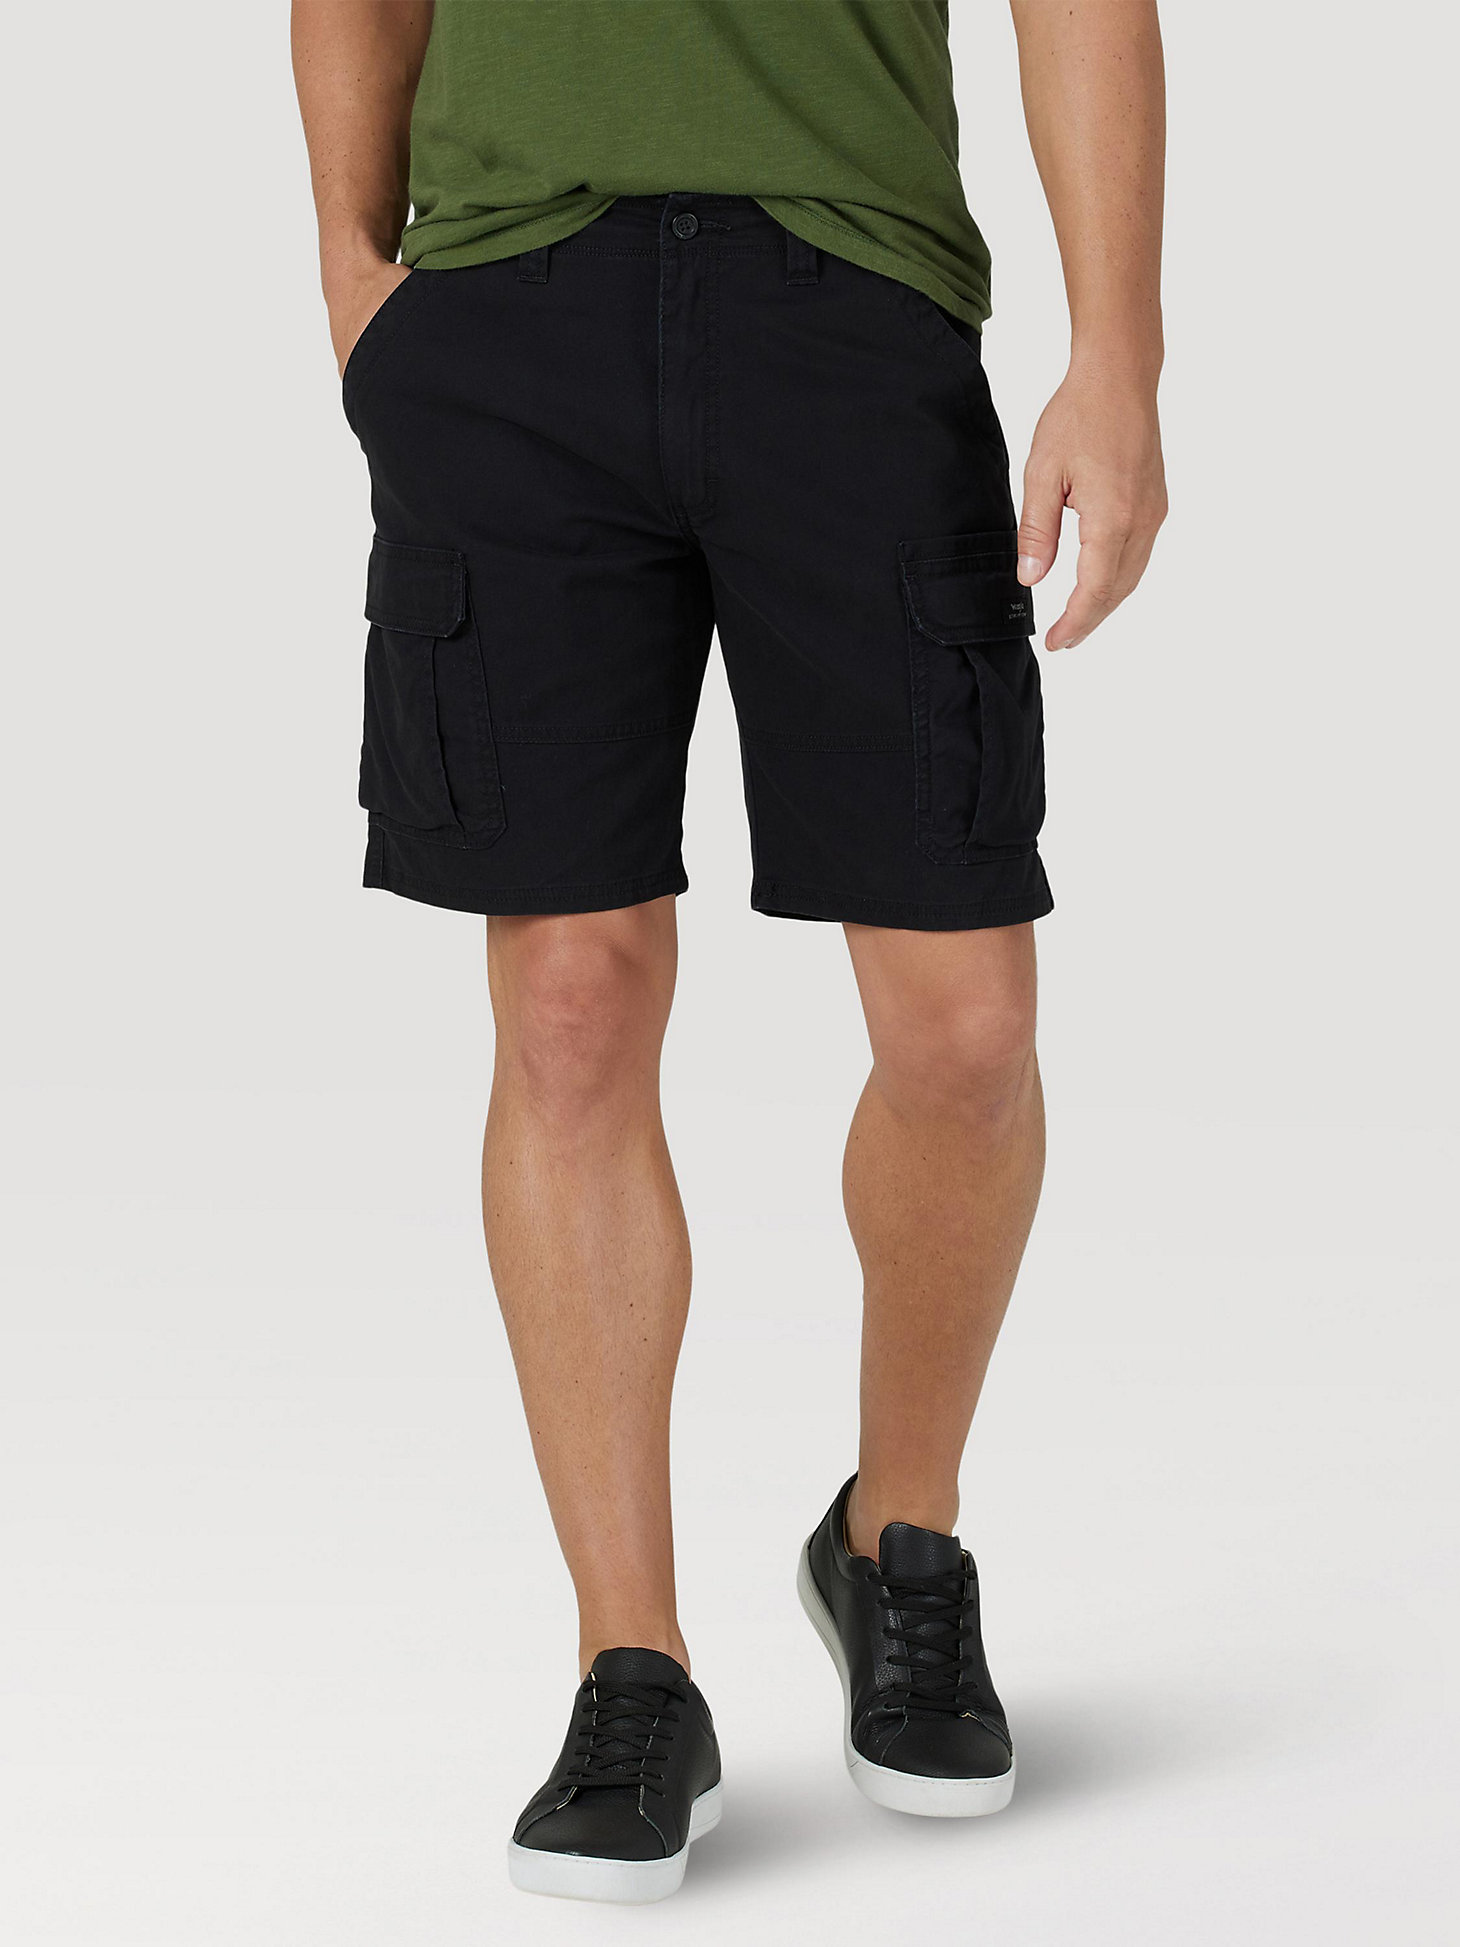 NEW Mens Mossimo Cargo Shorts Various Colors & Sizes Relaxed Fit 